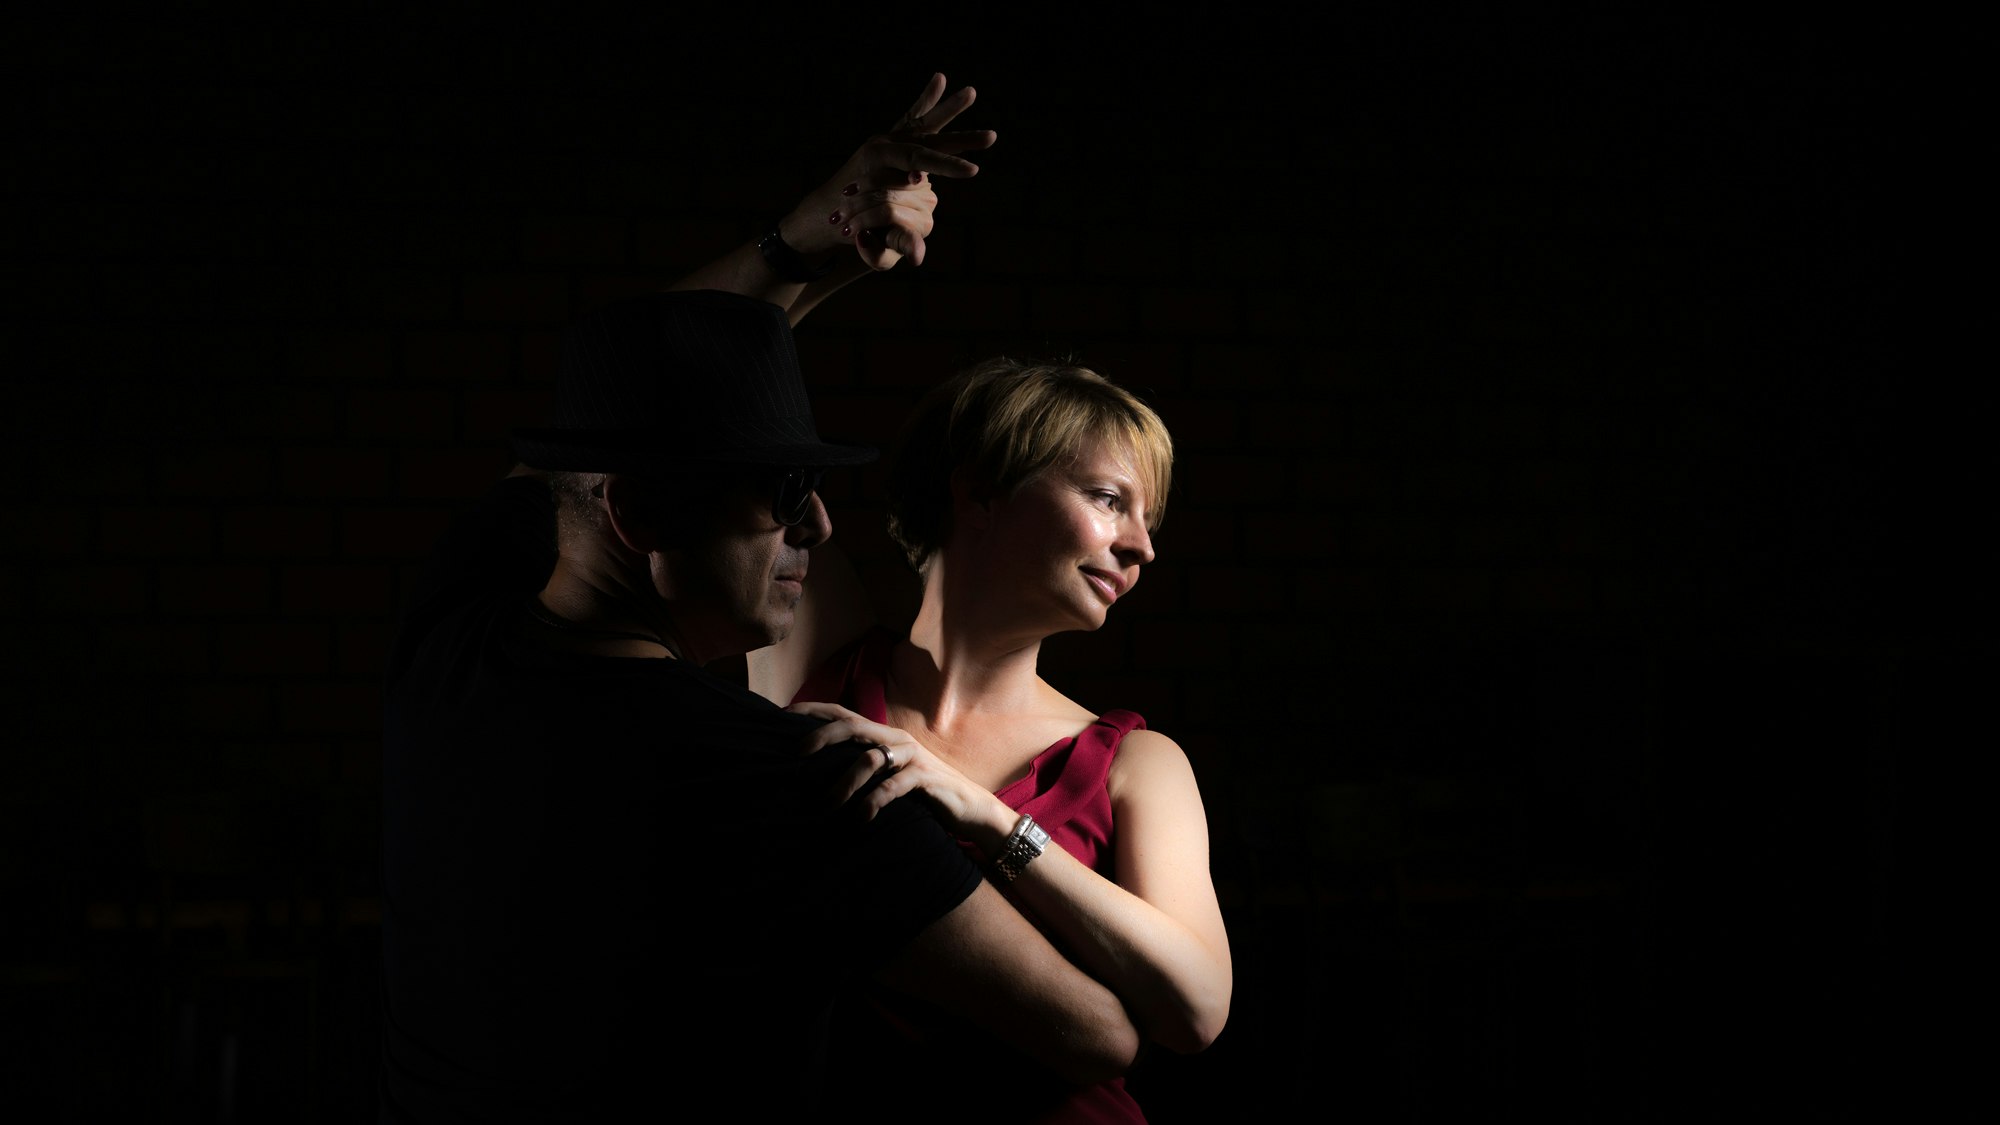 Jeannine is Dancing with a partner on a dark atmospheric picture.